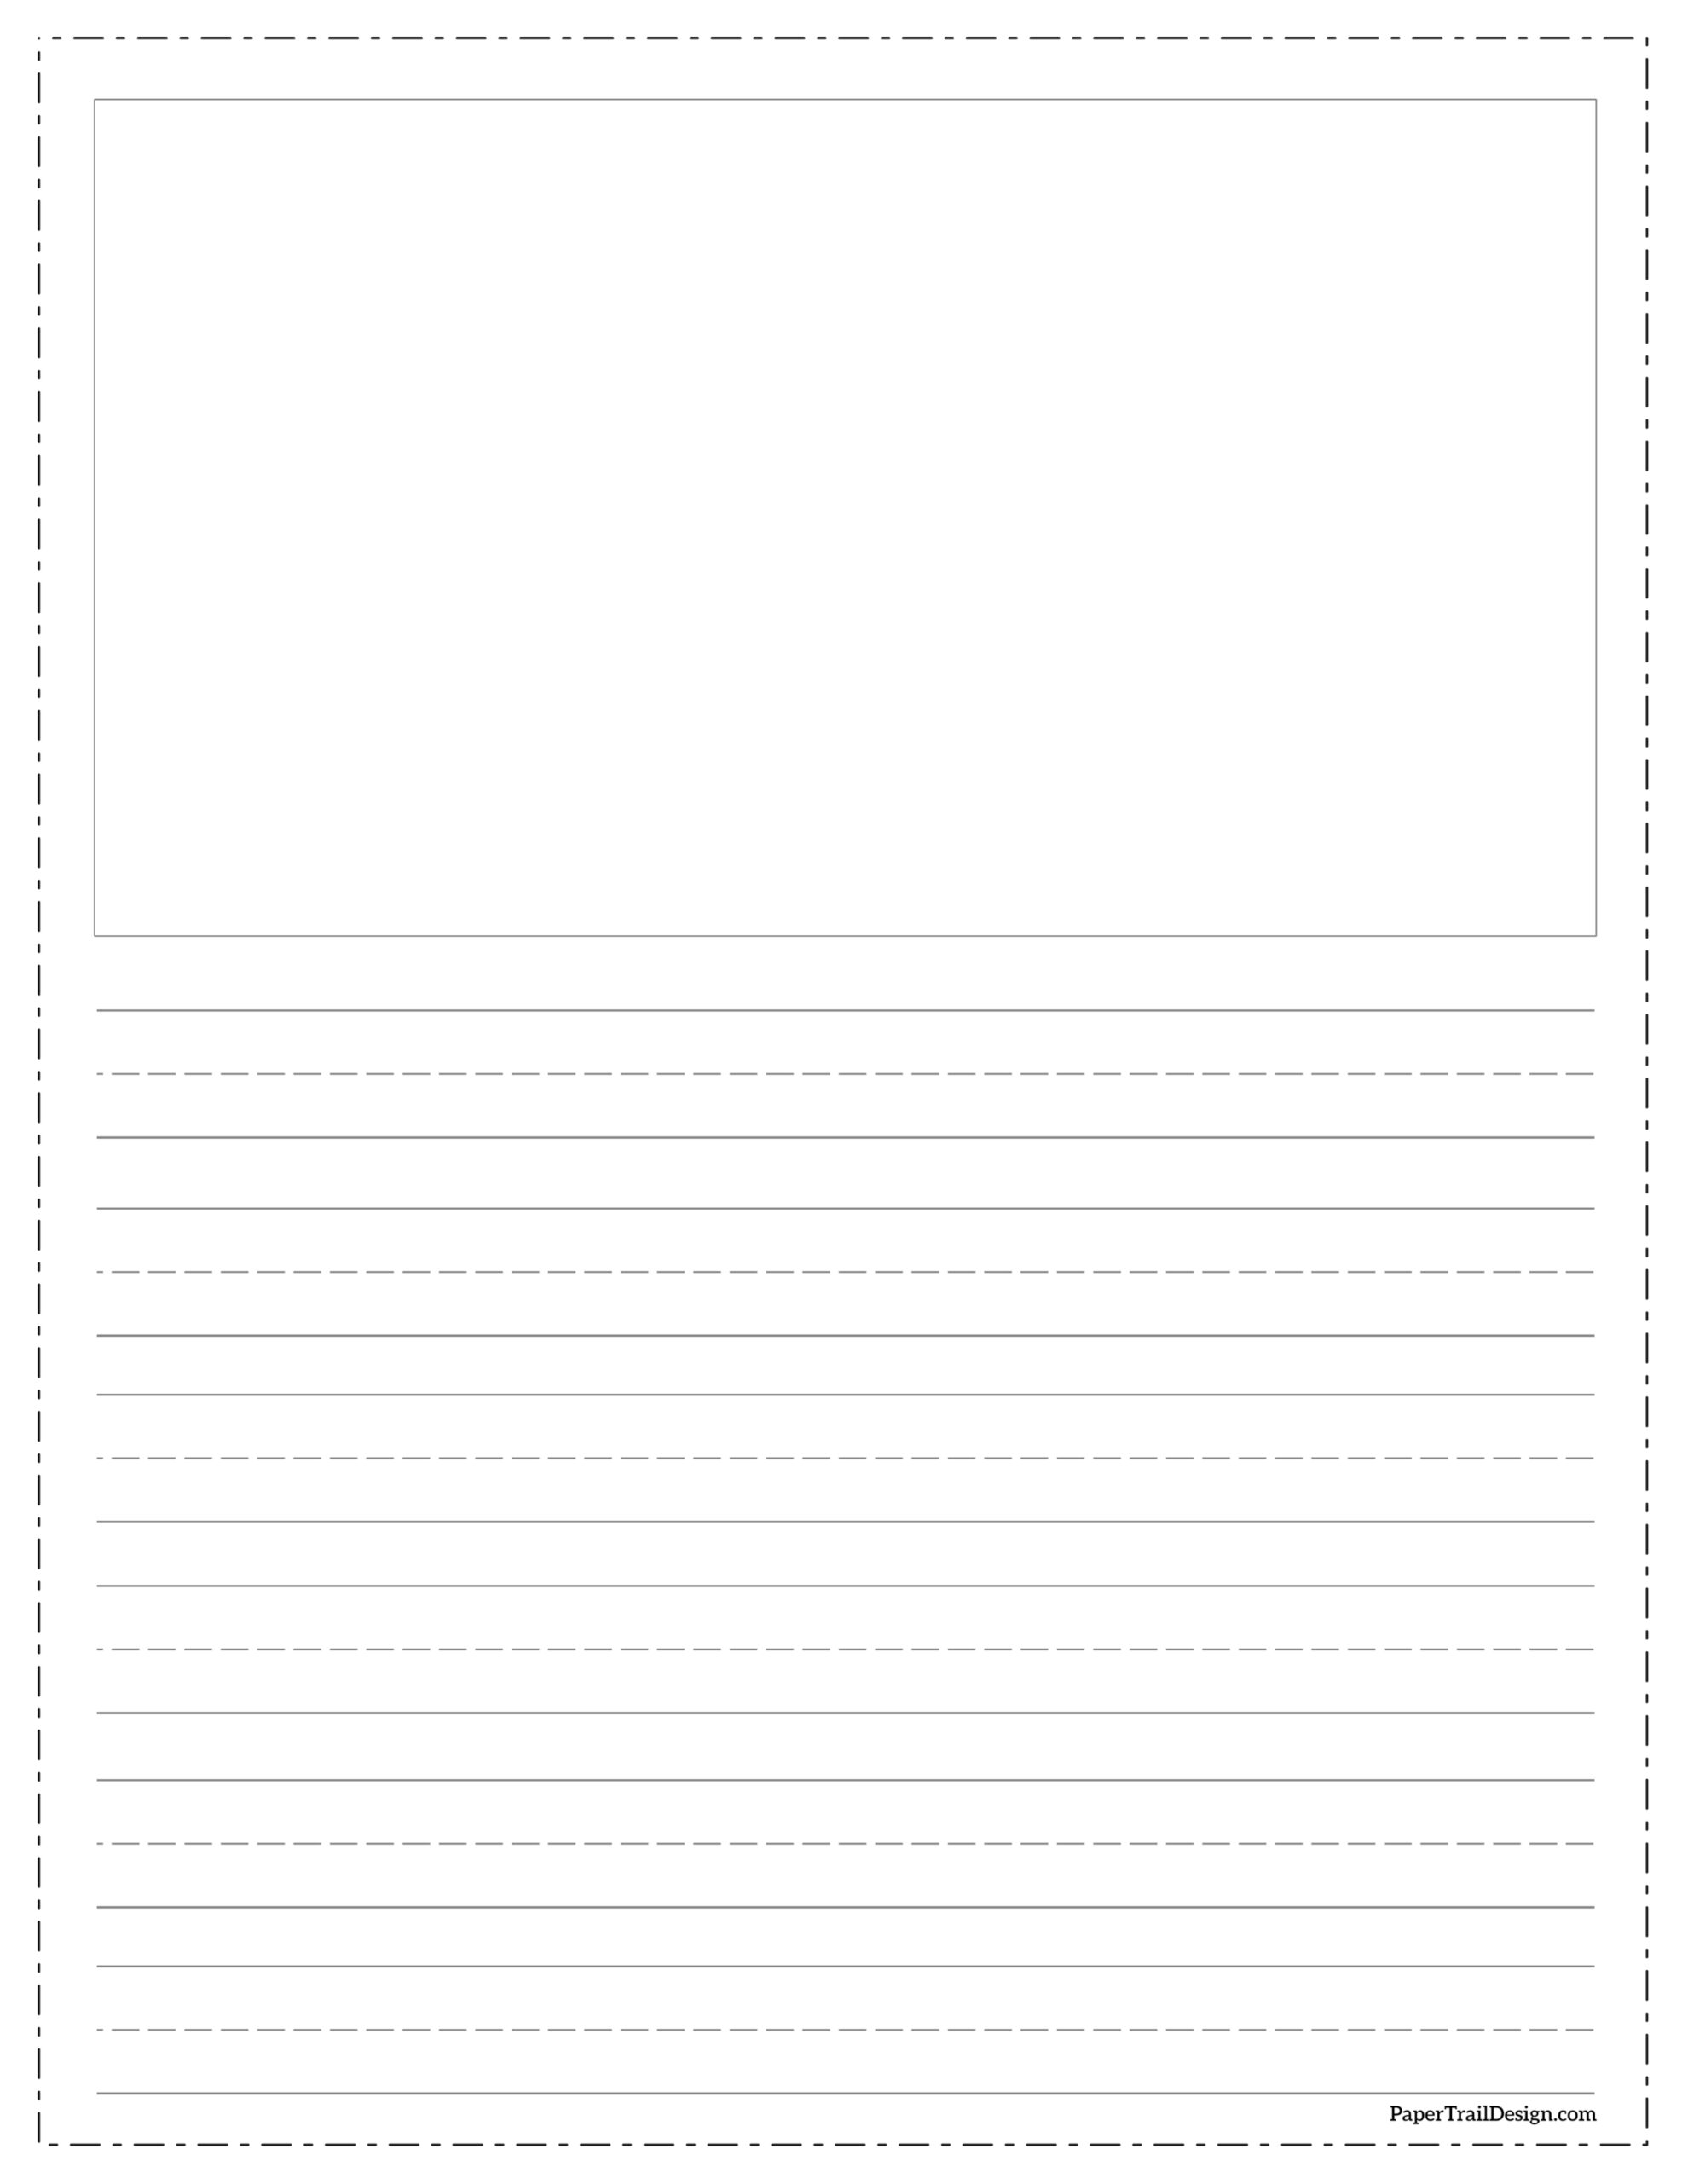 printable-lined-paper-for-kids-985-kids-paper-games-printable